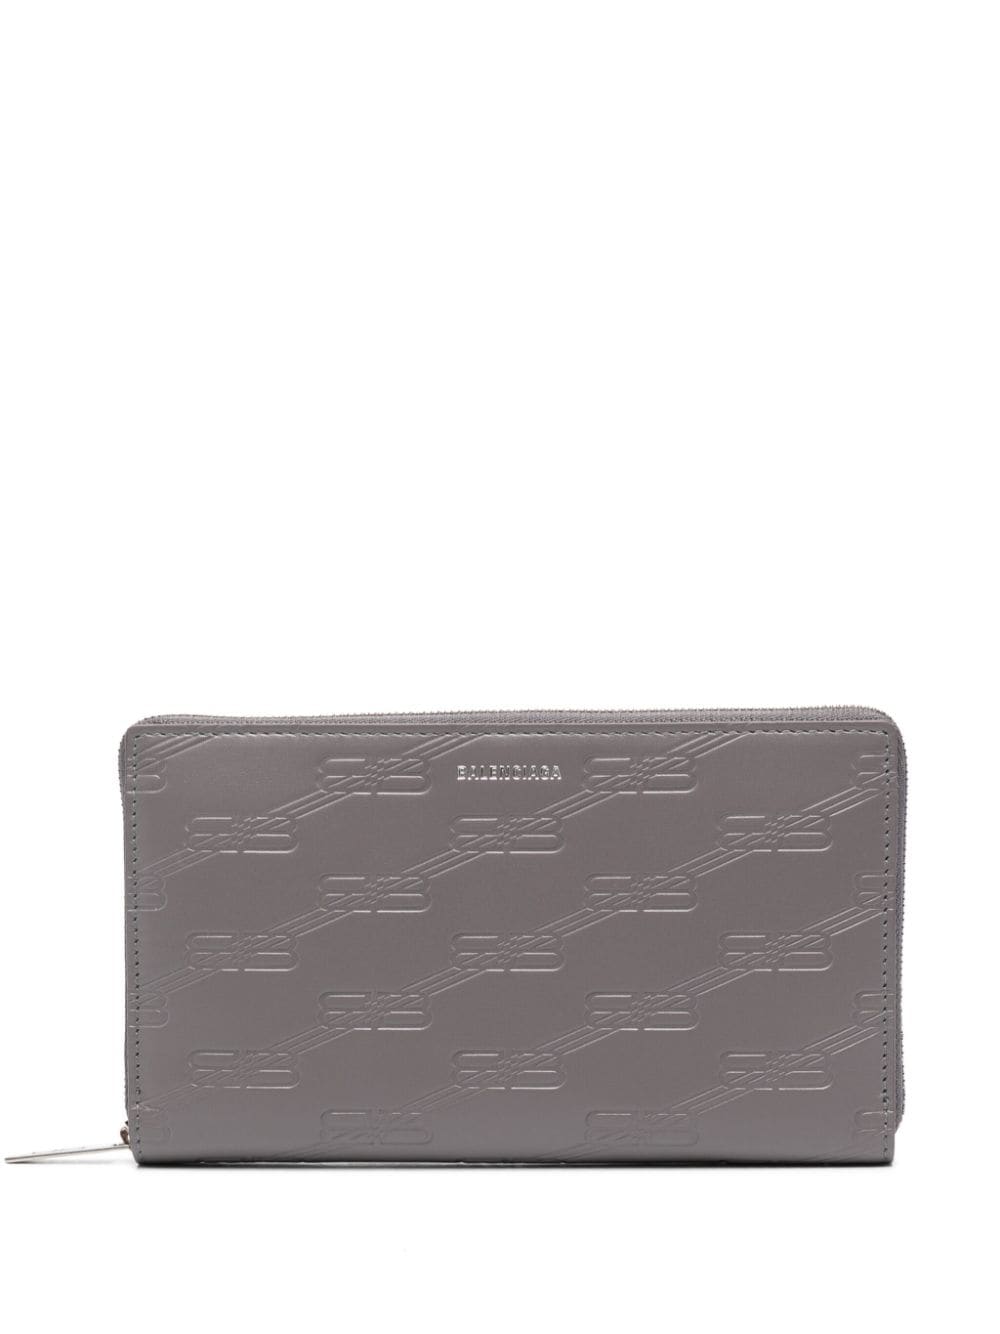 embossed-logo leather wallet